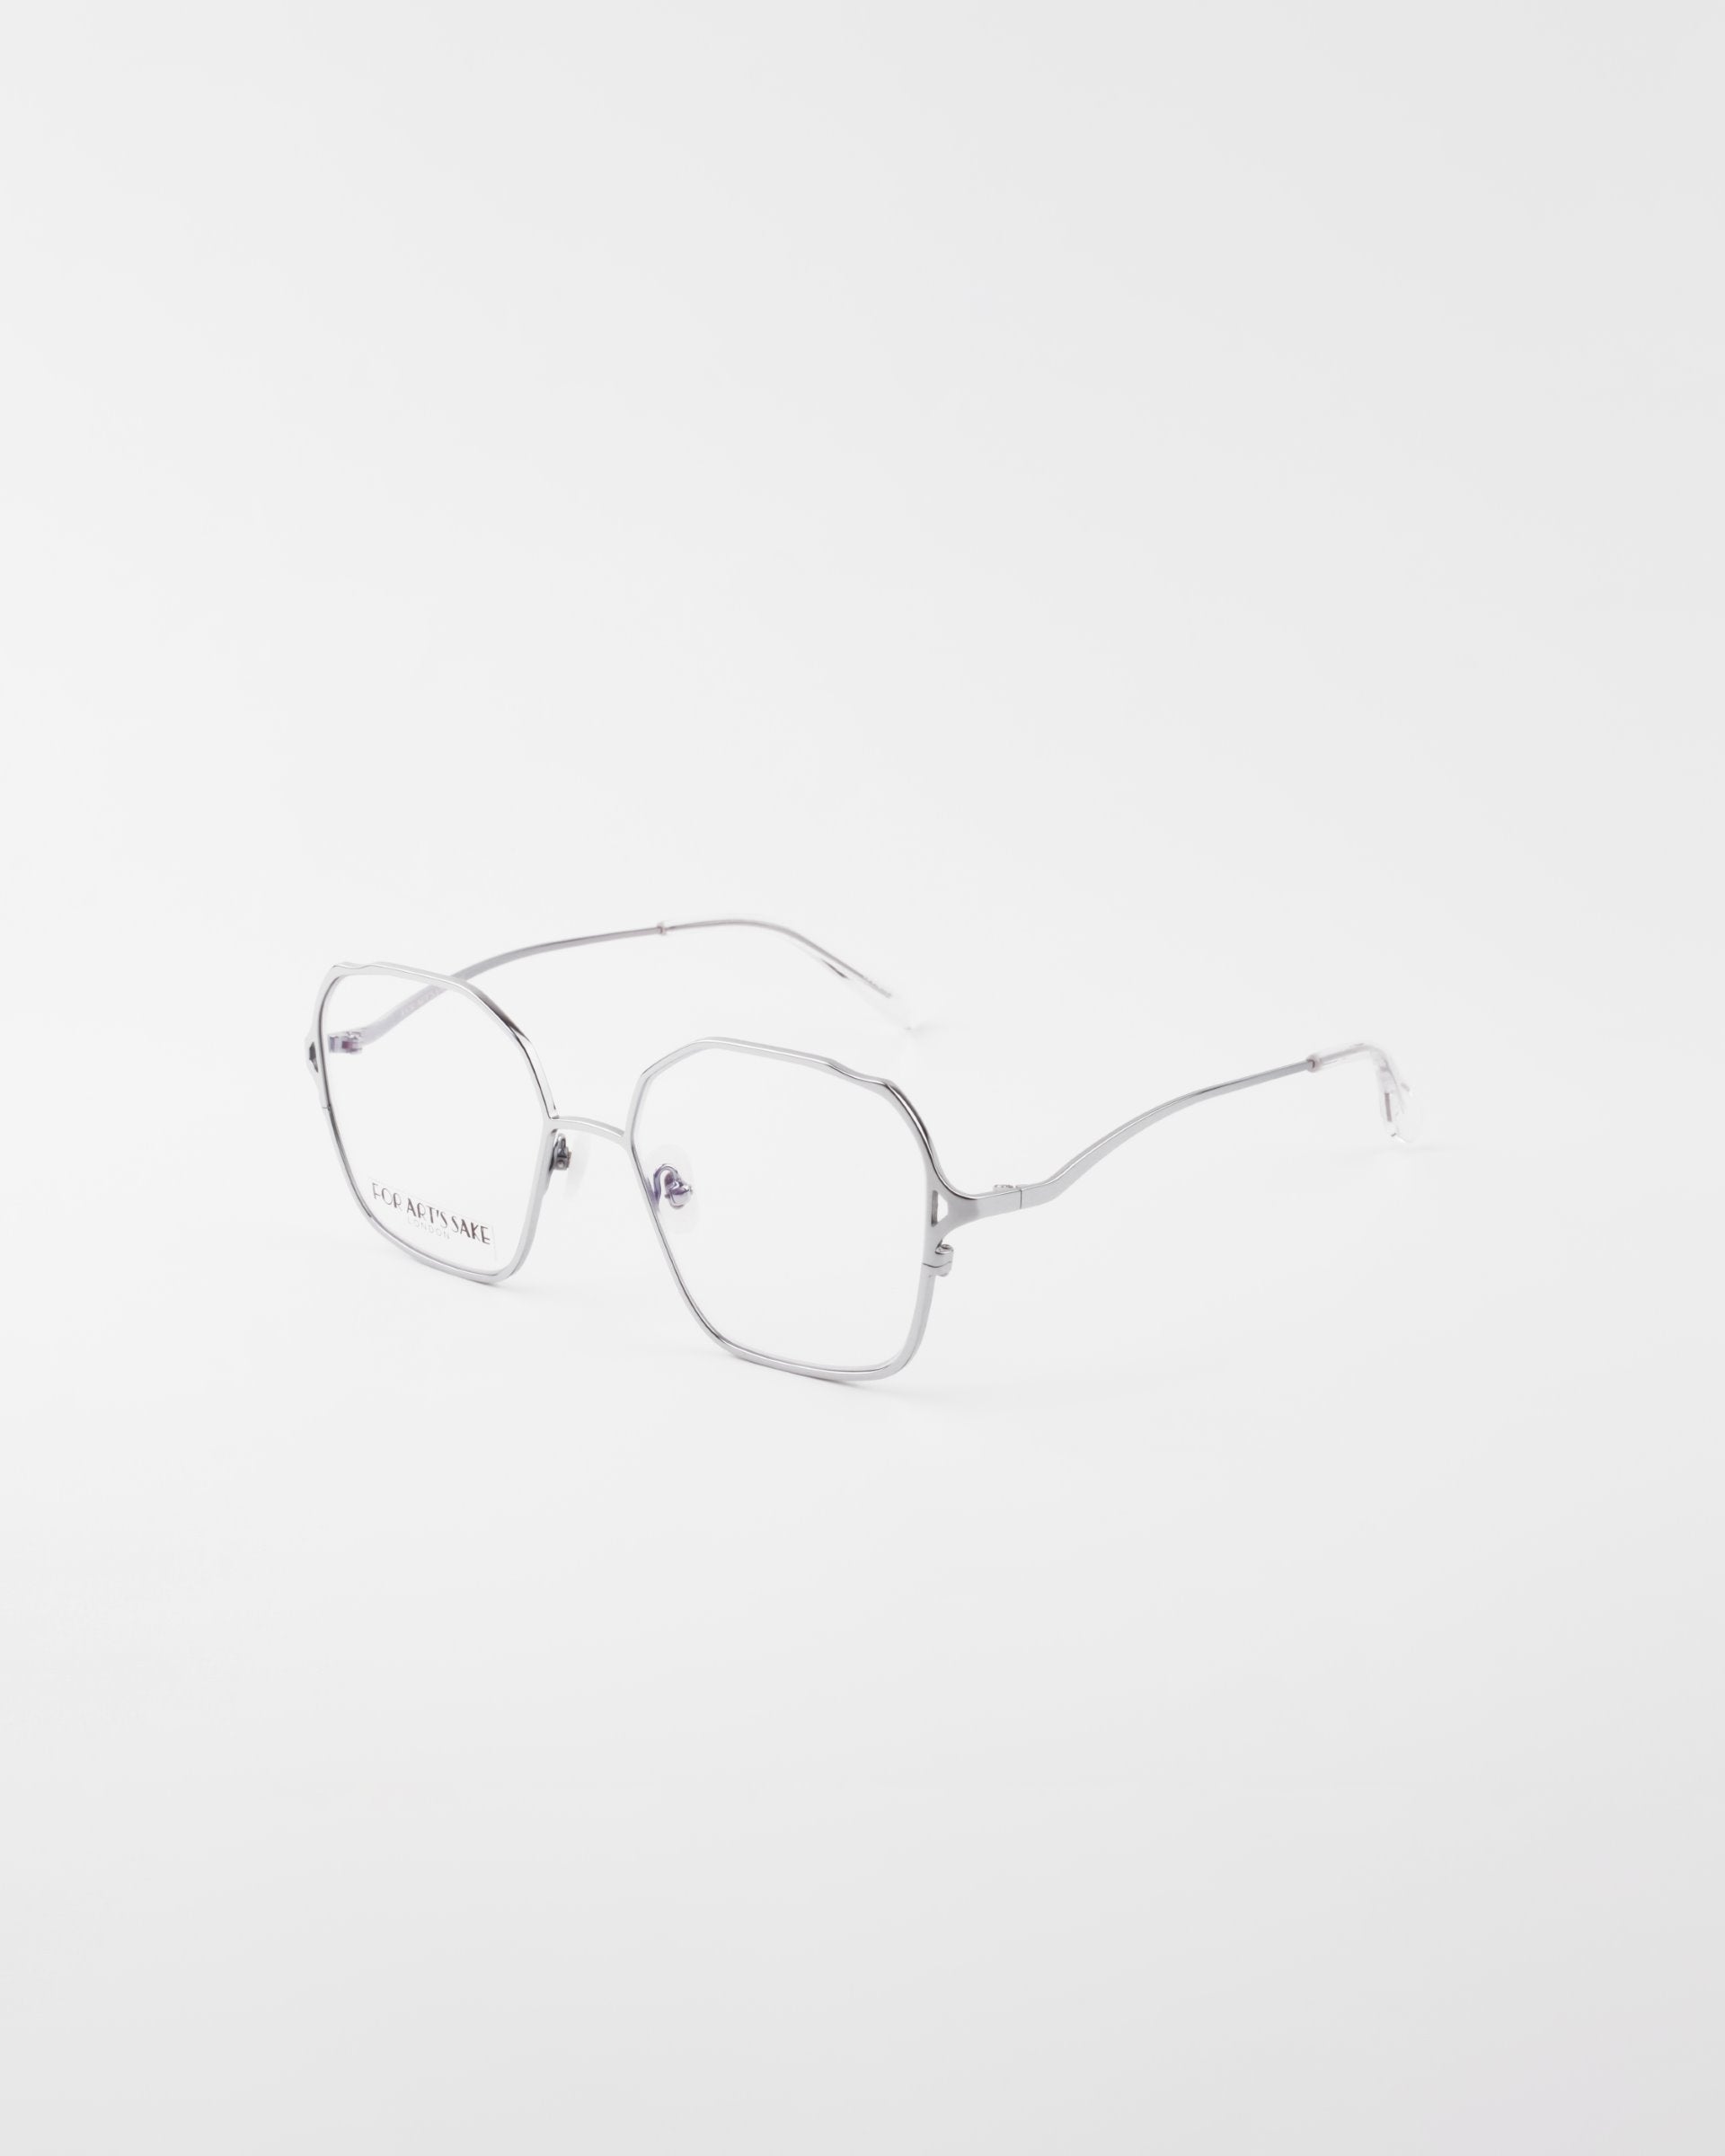 A pair of Mimi eyeglasses from For Art's Sake® with thin, 18-karat gold-plated frames and clear lenses is displayed on a plain white background. The glasses have a modern, minimalist design with hexagonal-shaped lenses and slim temples.